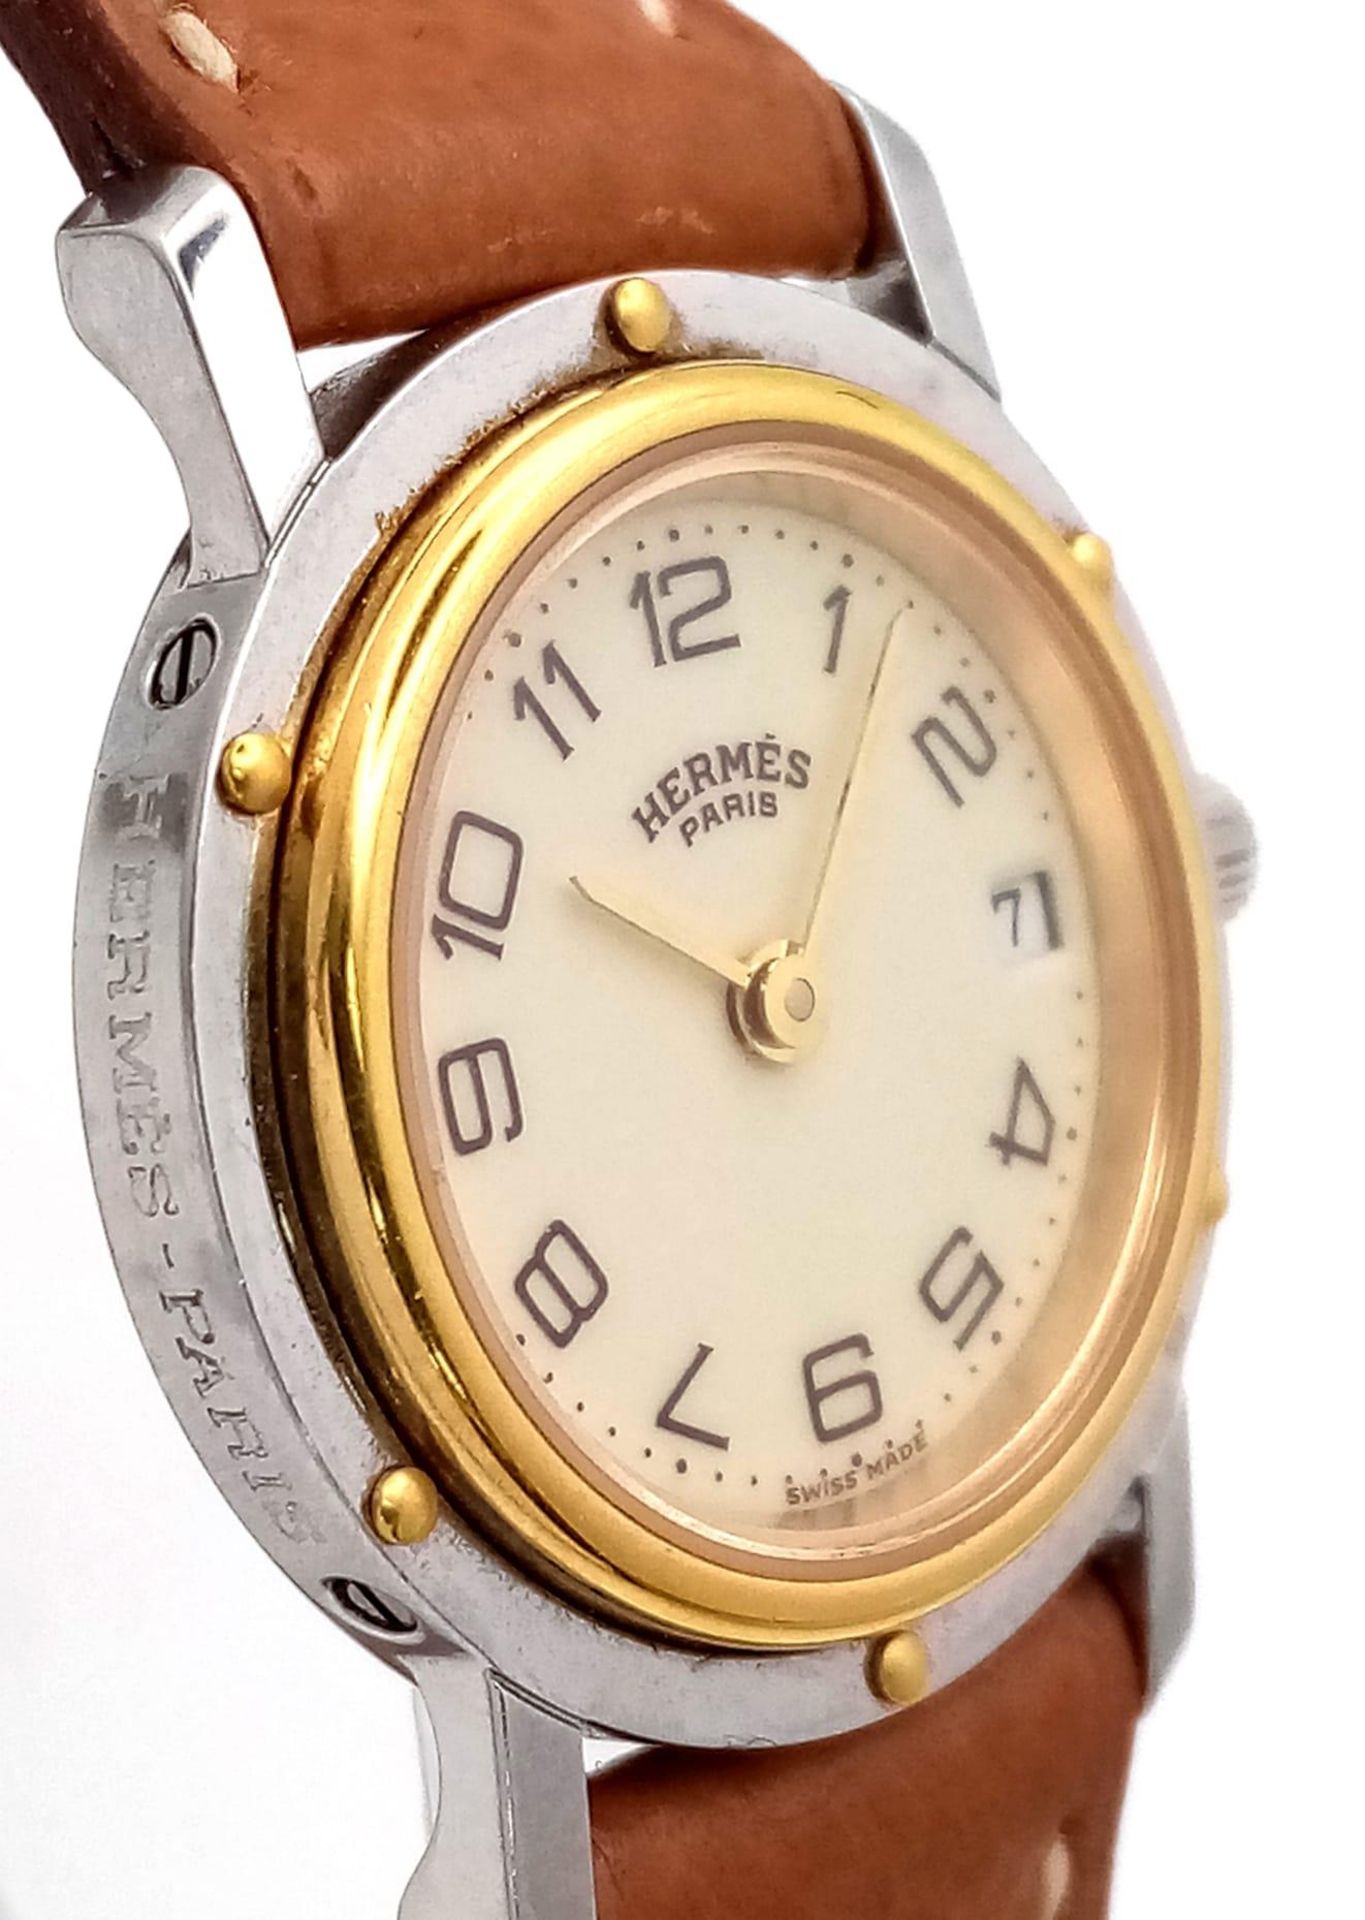 A FABULOUS HERMES OF PARIS LADIES WRISTWATCH WITH GOLD AND STAINLESS STEEL BODY AND TASTEFUL CREAM - Image 3 of 8